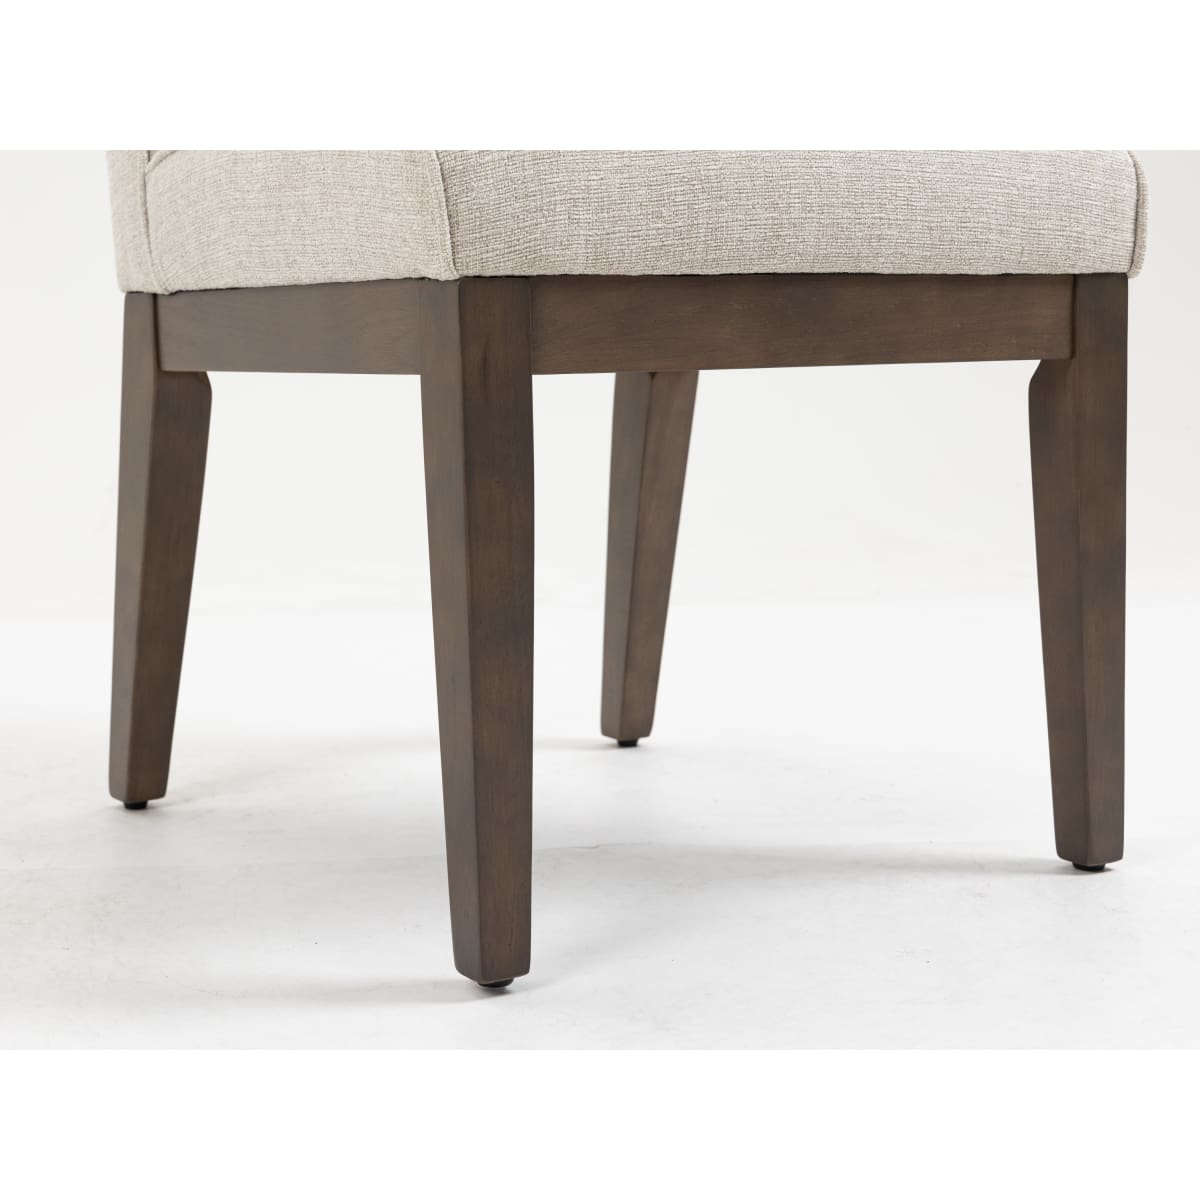 Hailey Dining Chair - dining-chairs